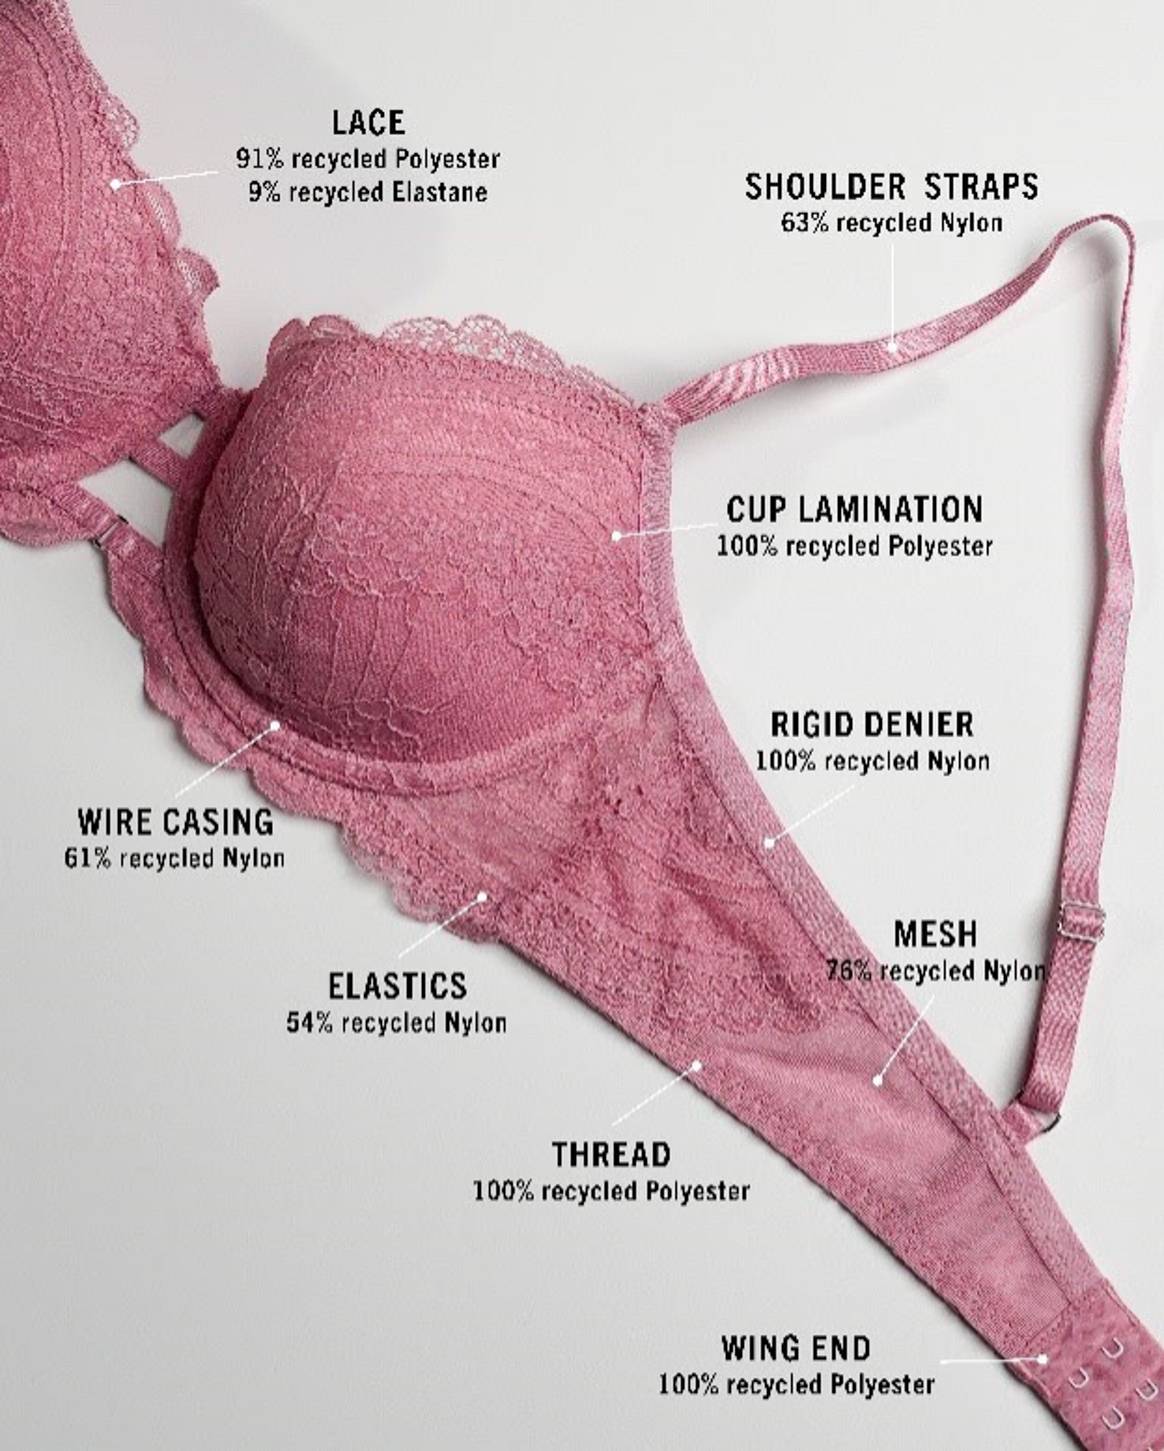 Bra of the Wies capsule collection by Hunkemöller. Image: Hunkemöller